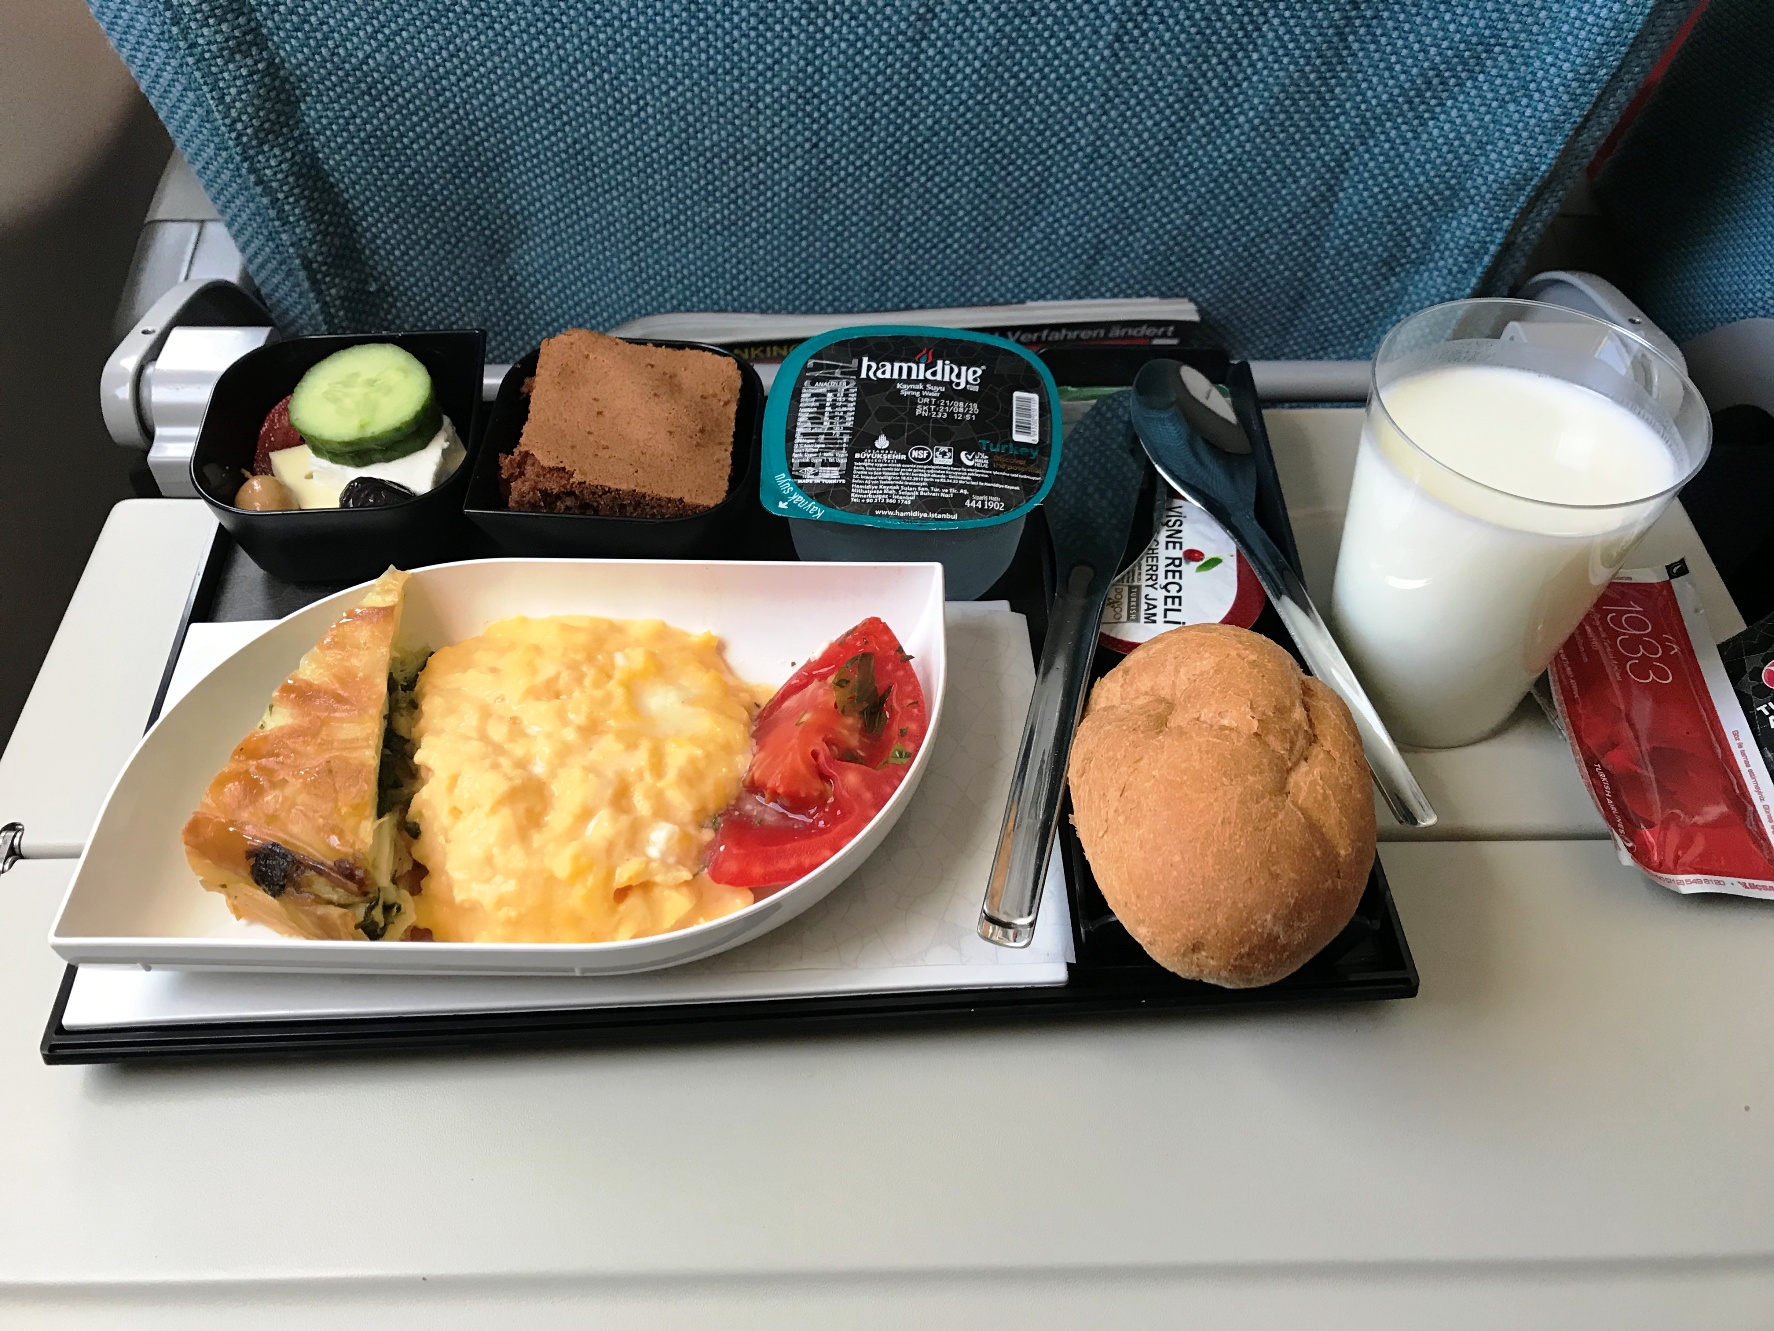 Turkish Airlines Inflight Meal (Istanbul-Munich)